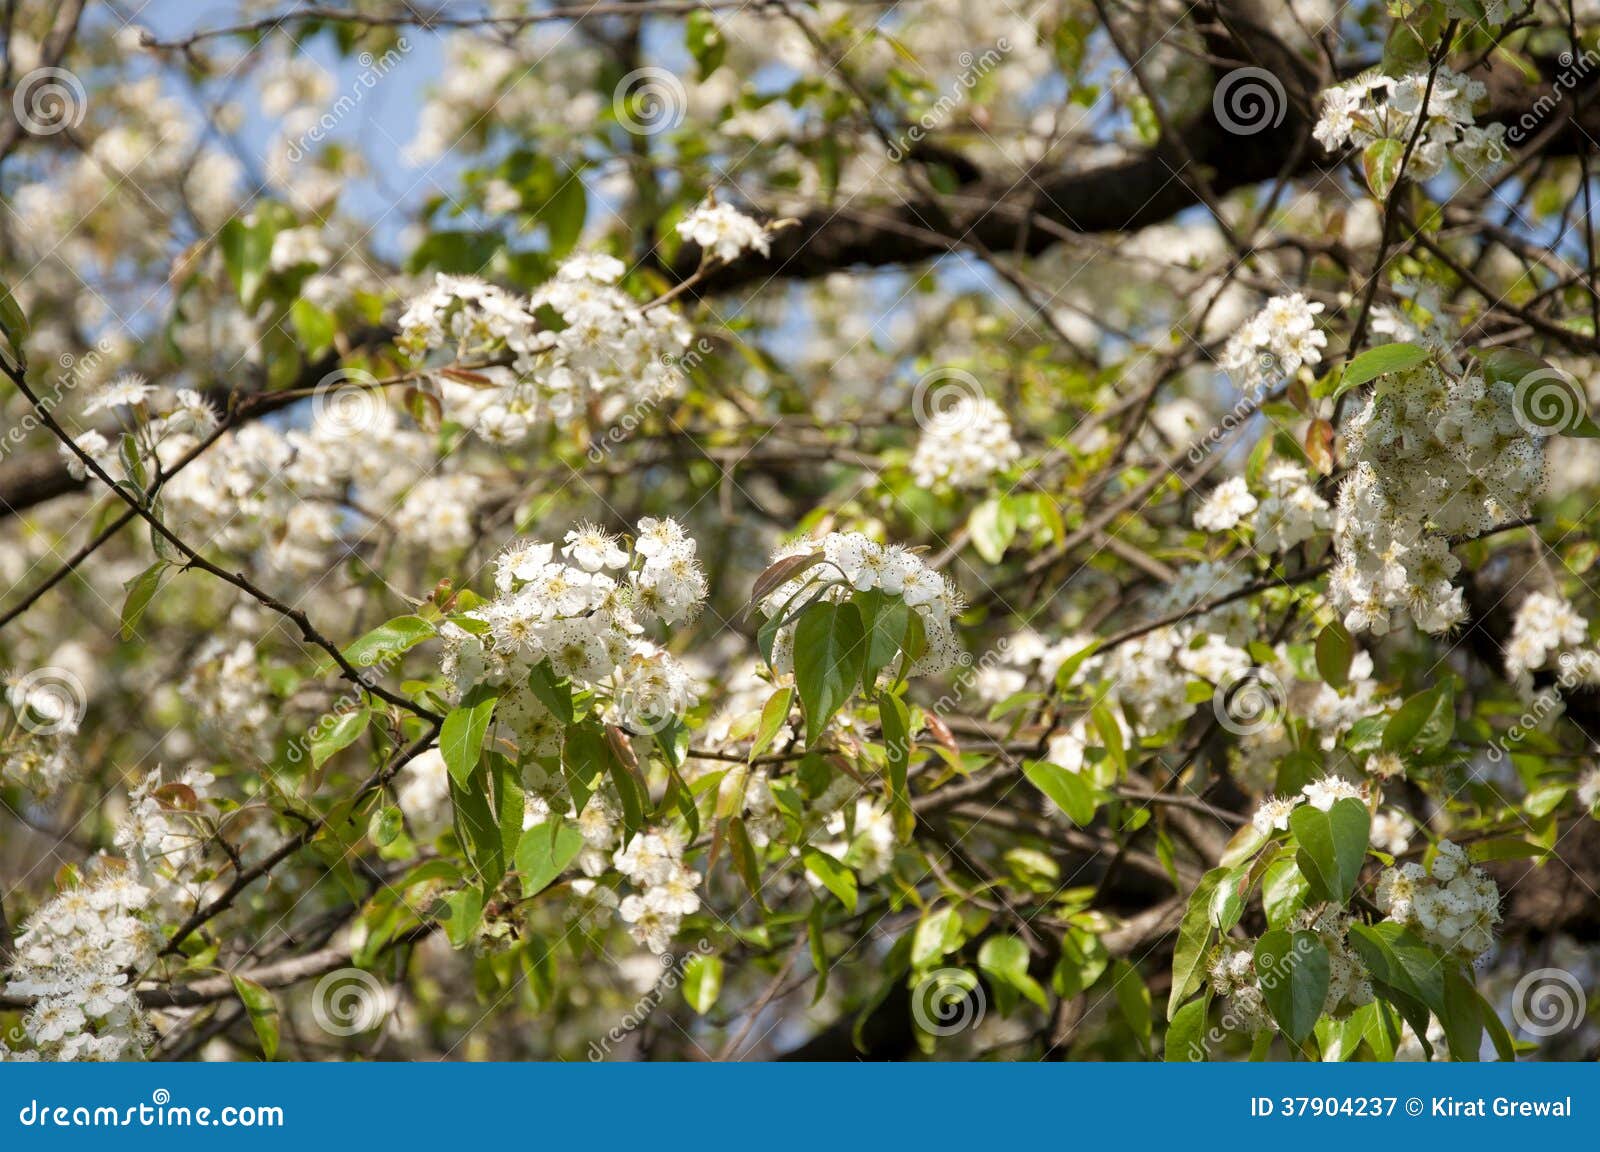 7 Wild Himalaya Pear Images, Stock Photos, 3D objects, & Vectors